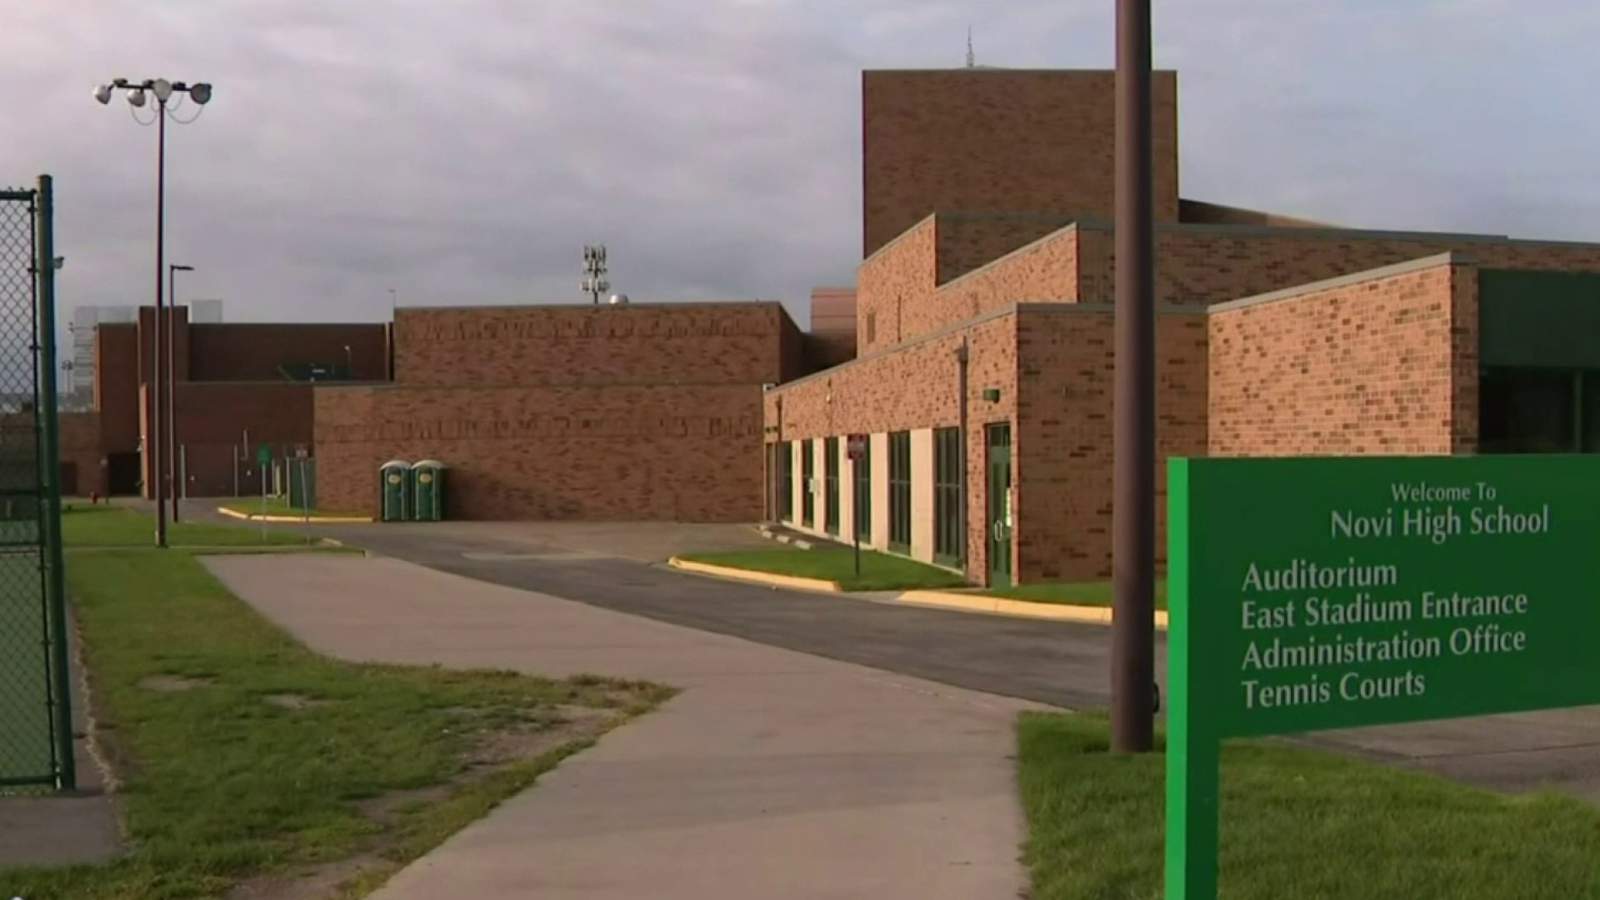 Novi High School cancels in-person learning, activities after 5 students test positive for coronavirus